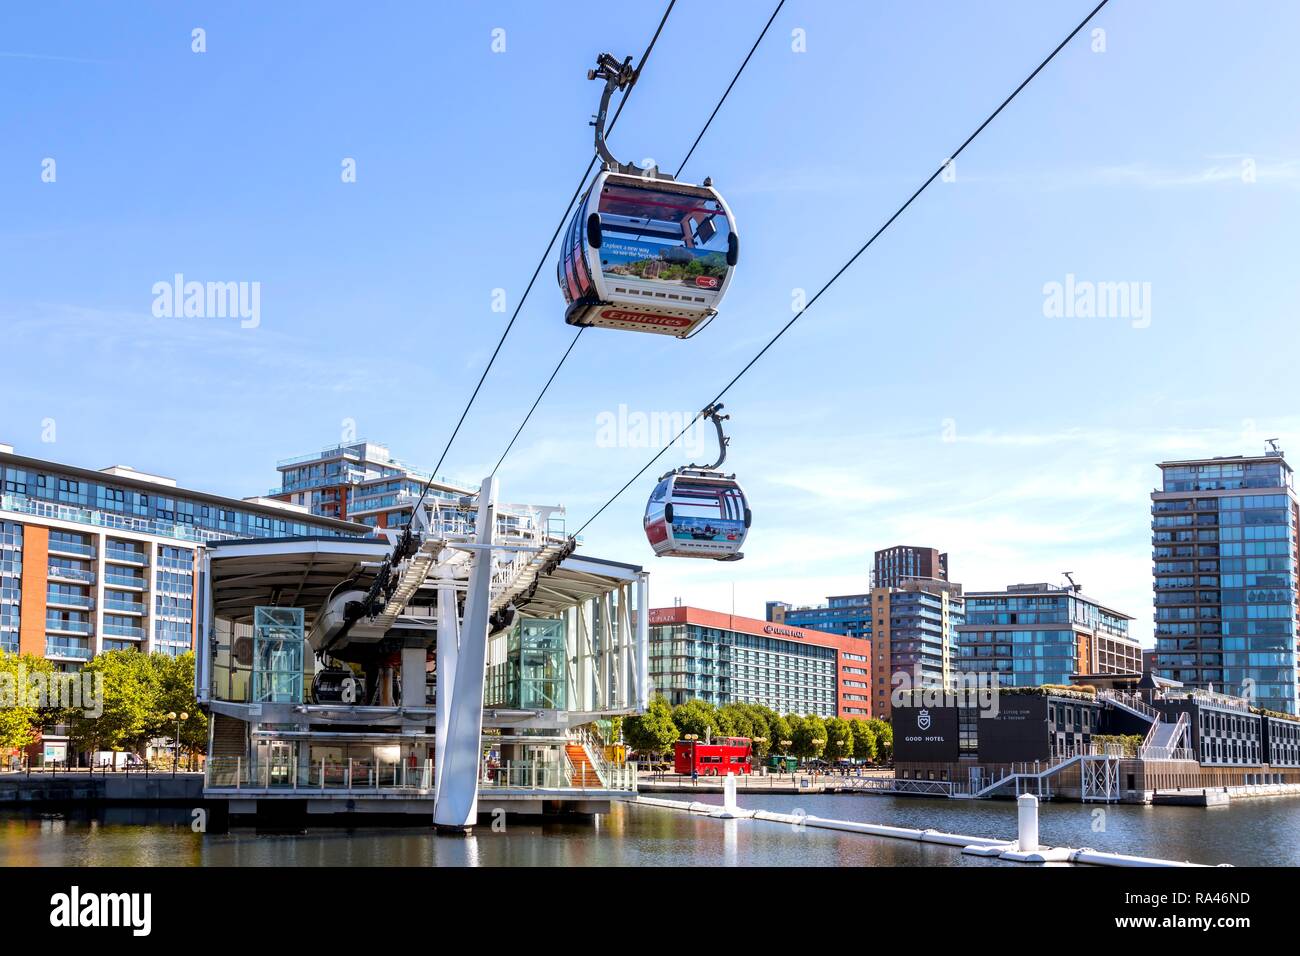 Emirates Air Line cable car across the Thames, London, Great Britain Stock Photo